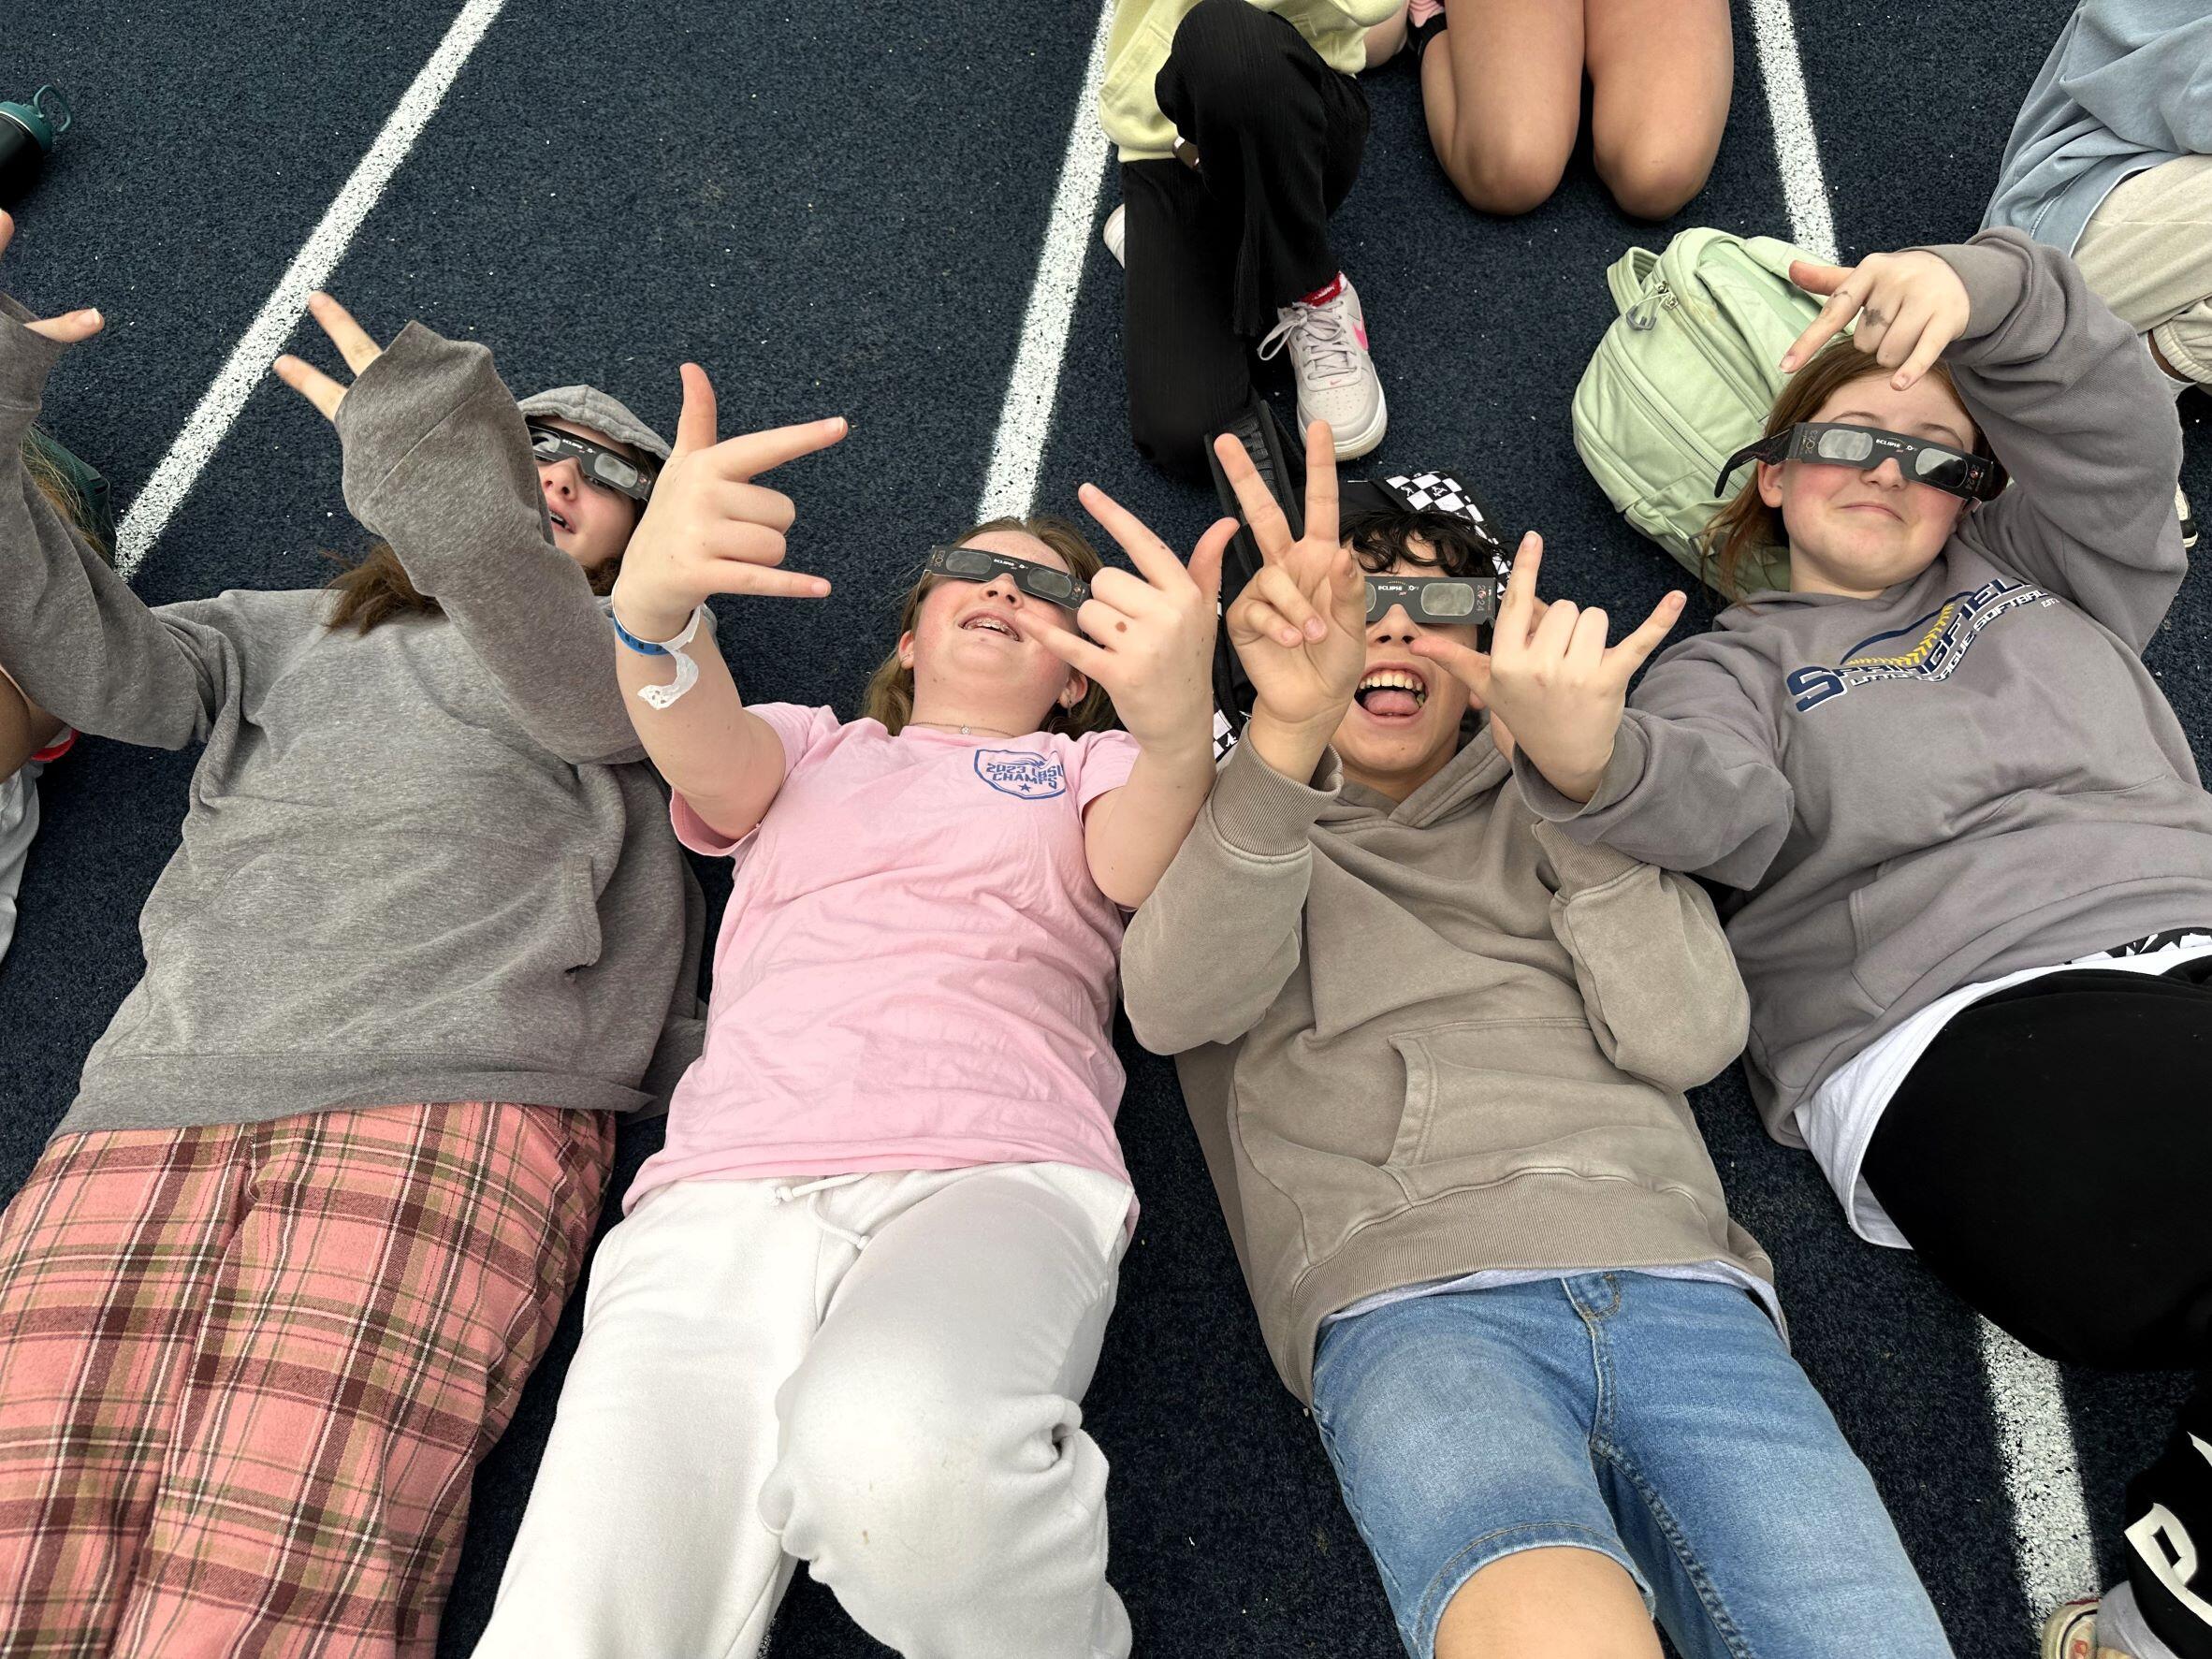 Four students laying on the track all wearing eclipse glasses. All are smiling at the camera and putting up peace and I love you signs with their hands